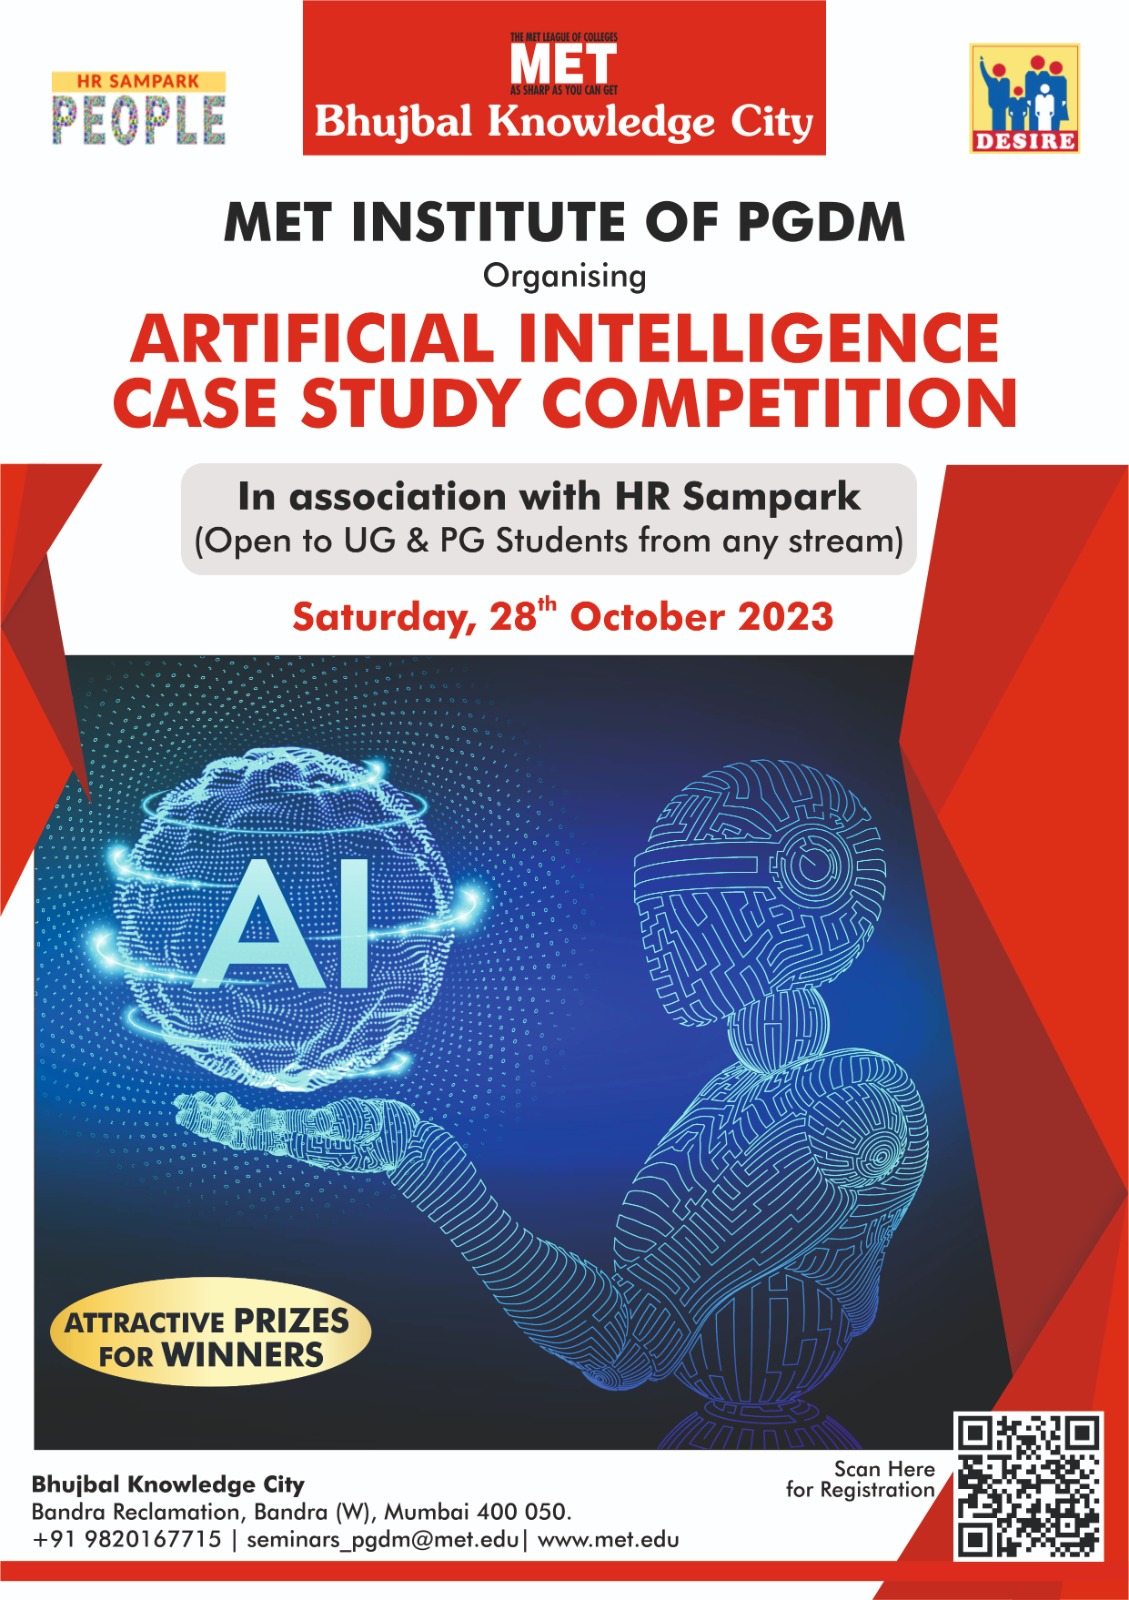 Case Study Competition on Artificial Intelligence 2023